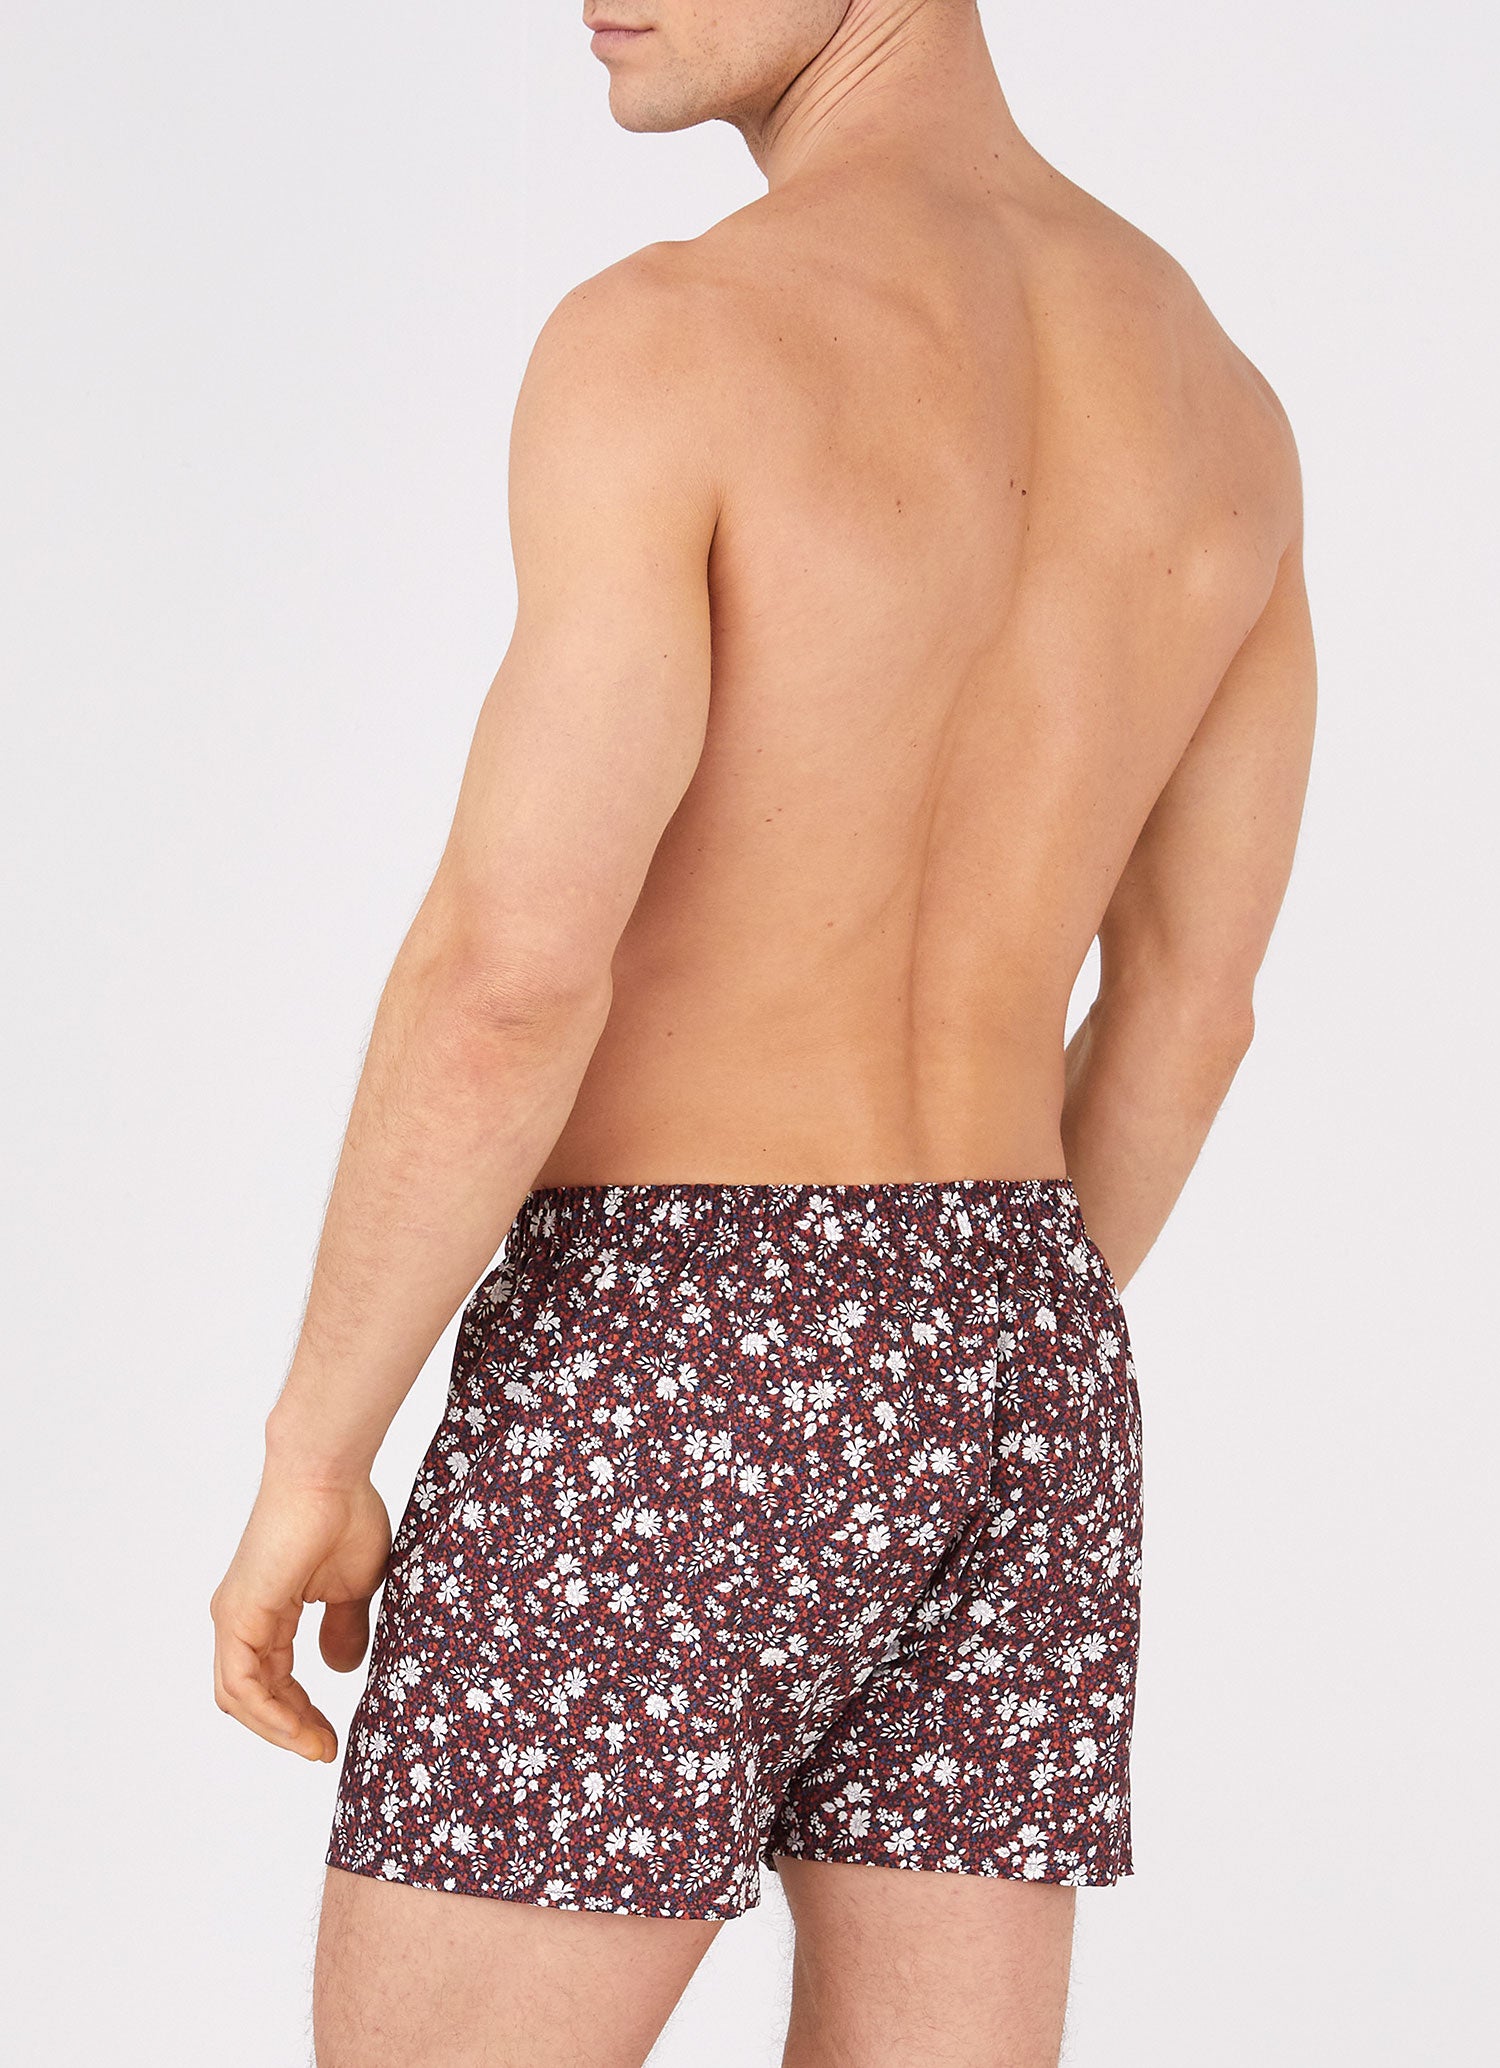 Men's Liberty Print Boxer Shorts in Red Pepper Floral